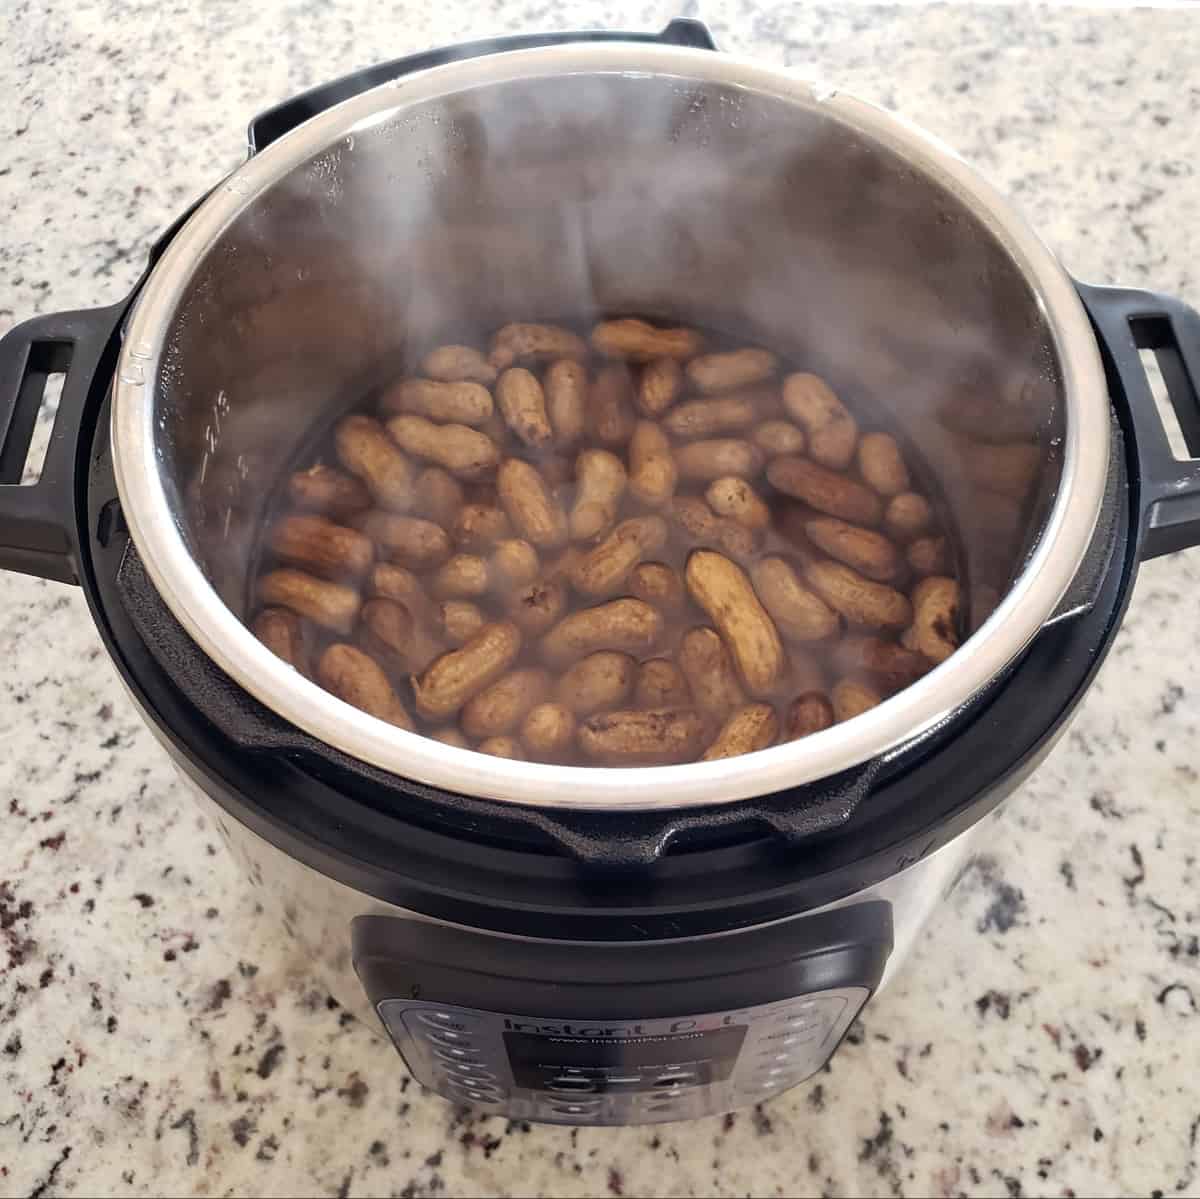 Cooked peanuts in the shell in an Instant Pot.